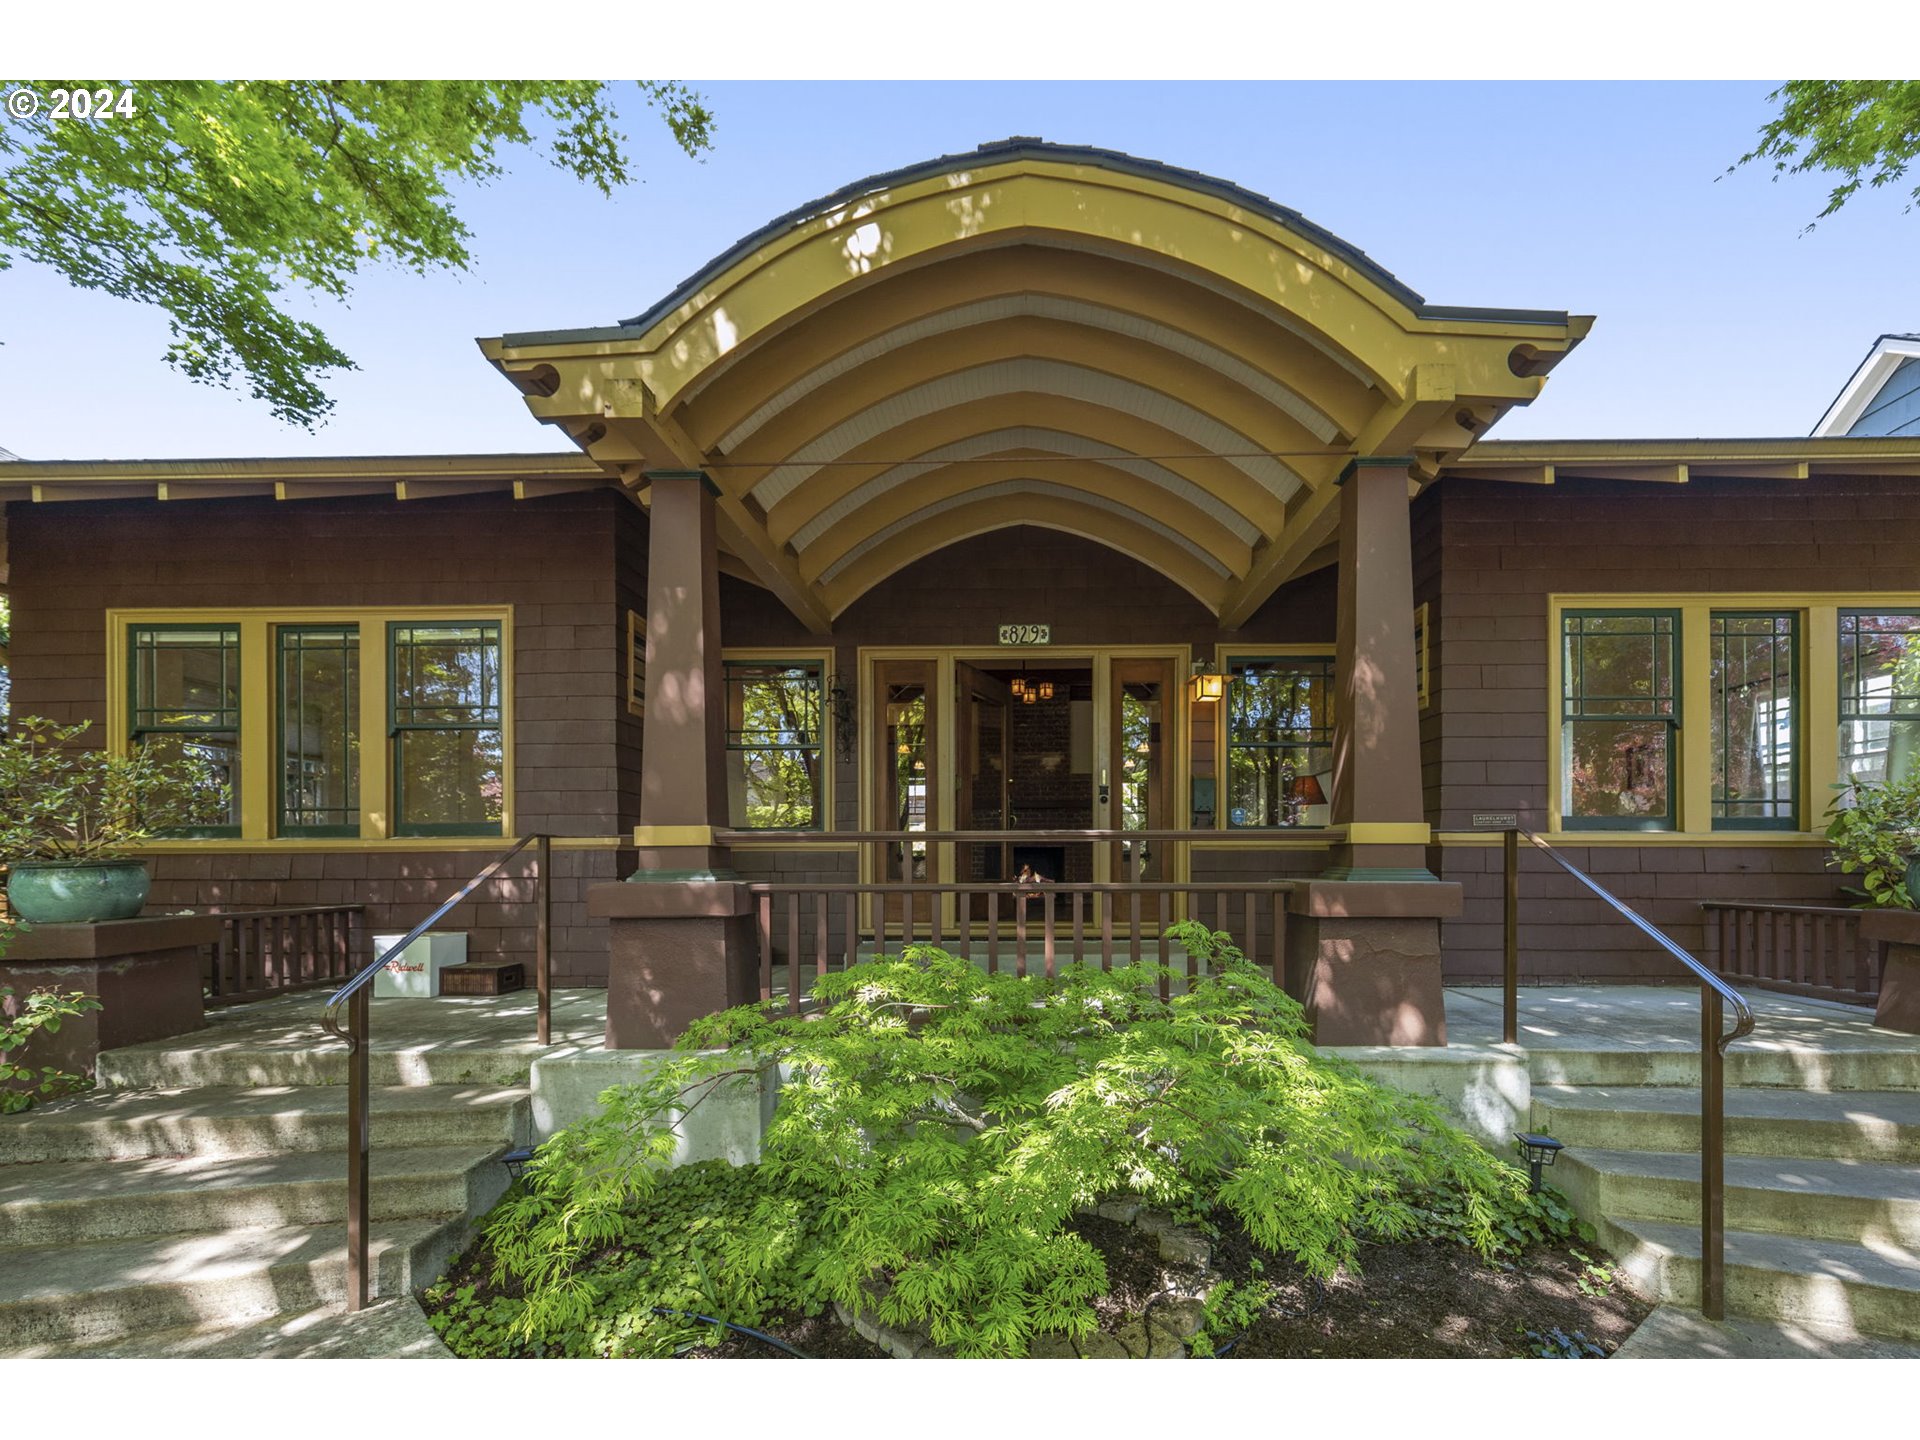 The quintessential historic craftsman bungalo.  Prime location in the heart of Laurelhurst. Beautiful artisan woodwork and craftmanship from 1910 with modern updates such as a 220 Electric Tesla charger, owned solar panels and increased insulation.  Additional access and parking on Peerless with separate living/work cottage with bathroom and shower plus 2 full bathrooms in the main home.